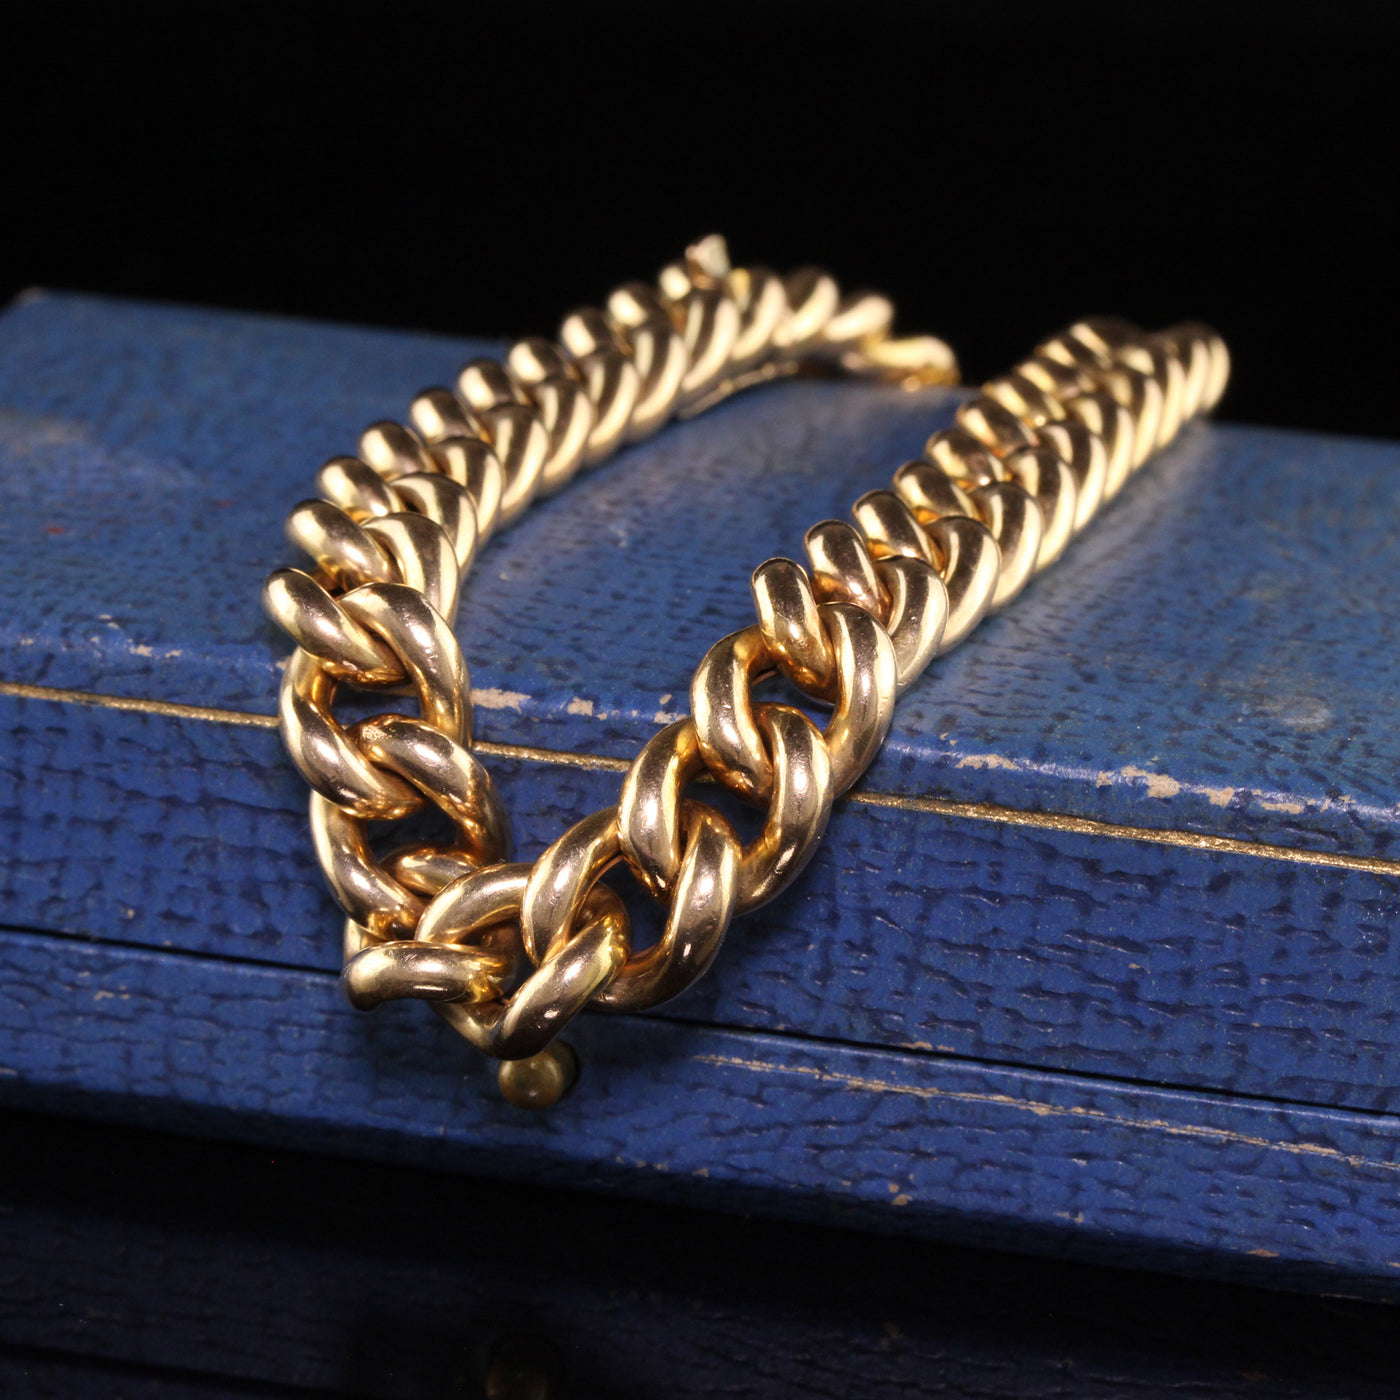 Antique Victorian 15K Yellow Gold Curb Link Chain Bracelet - 8 1/2 inches